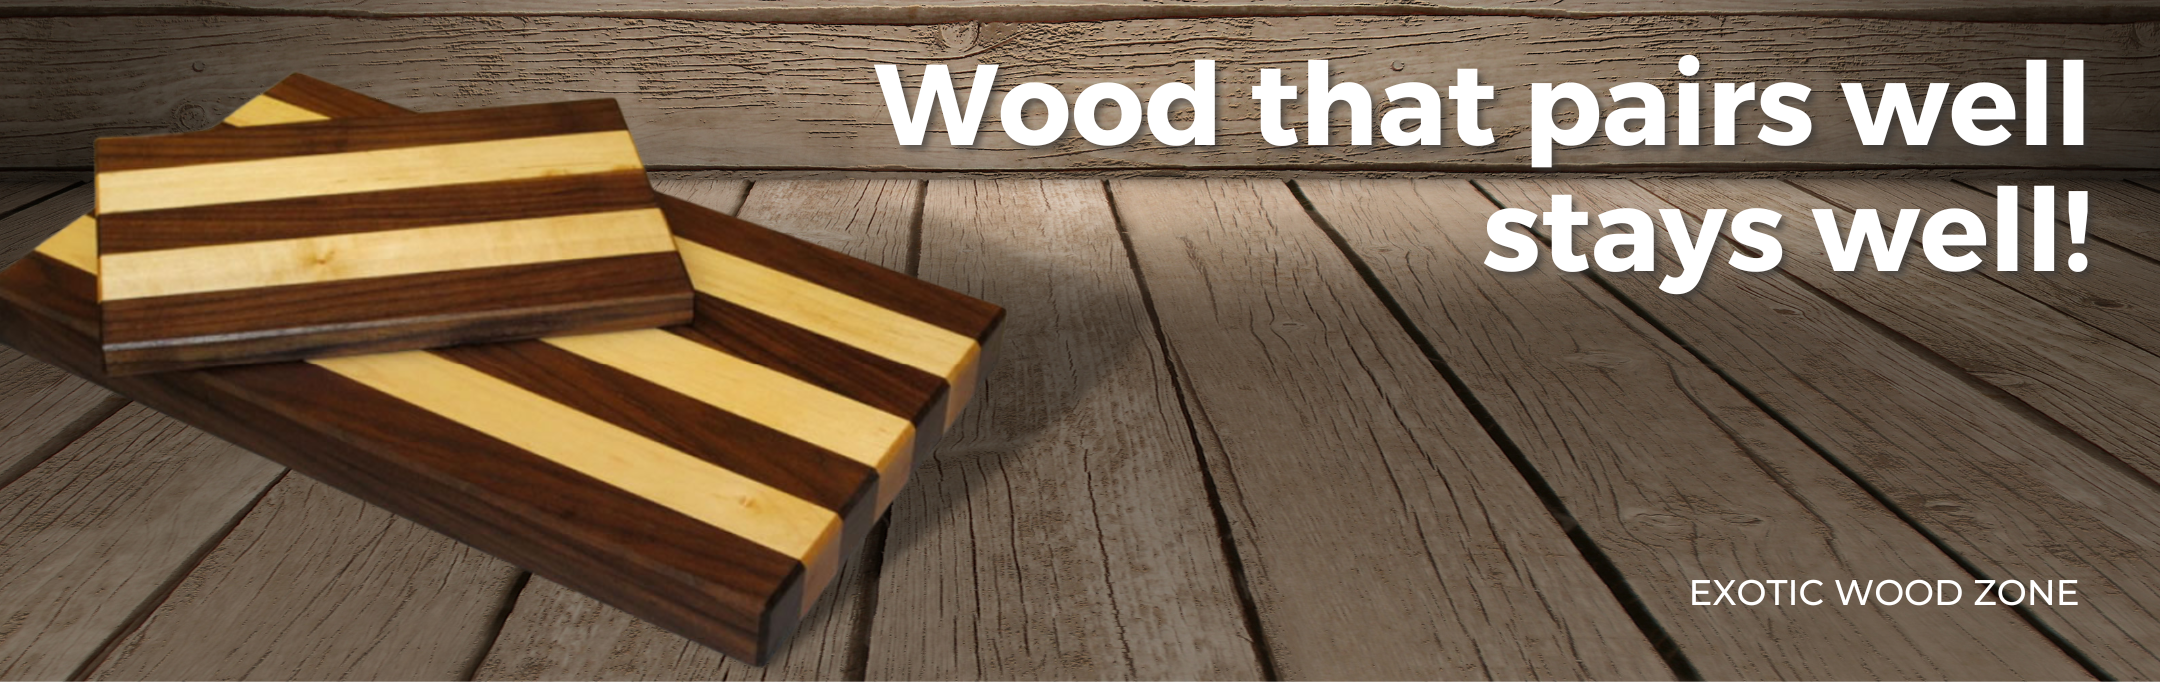 Wood that pairs well stays well!